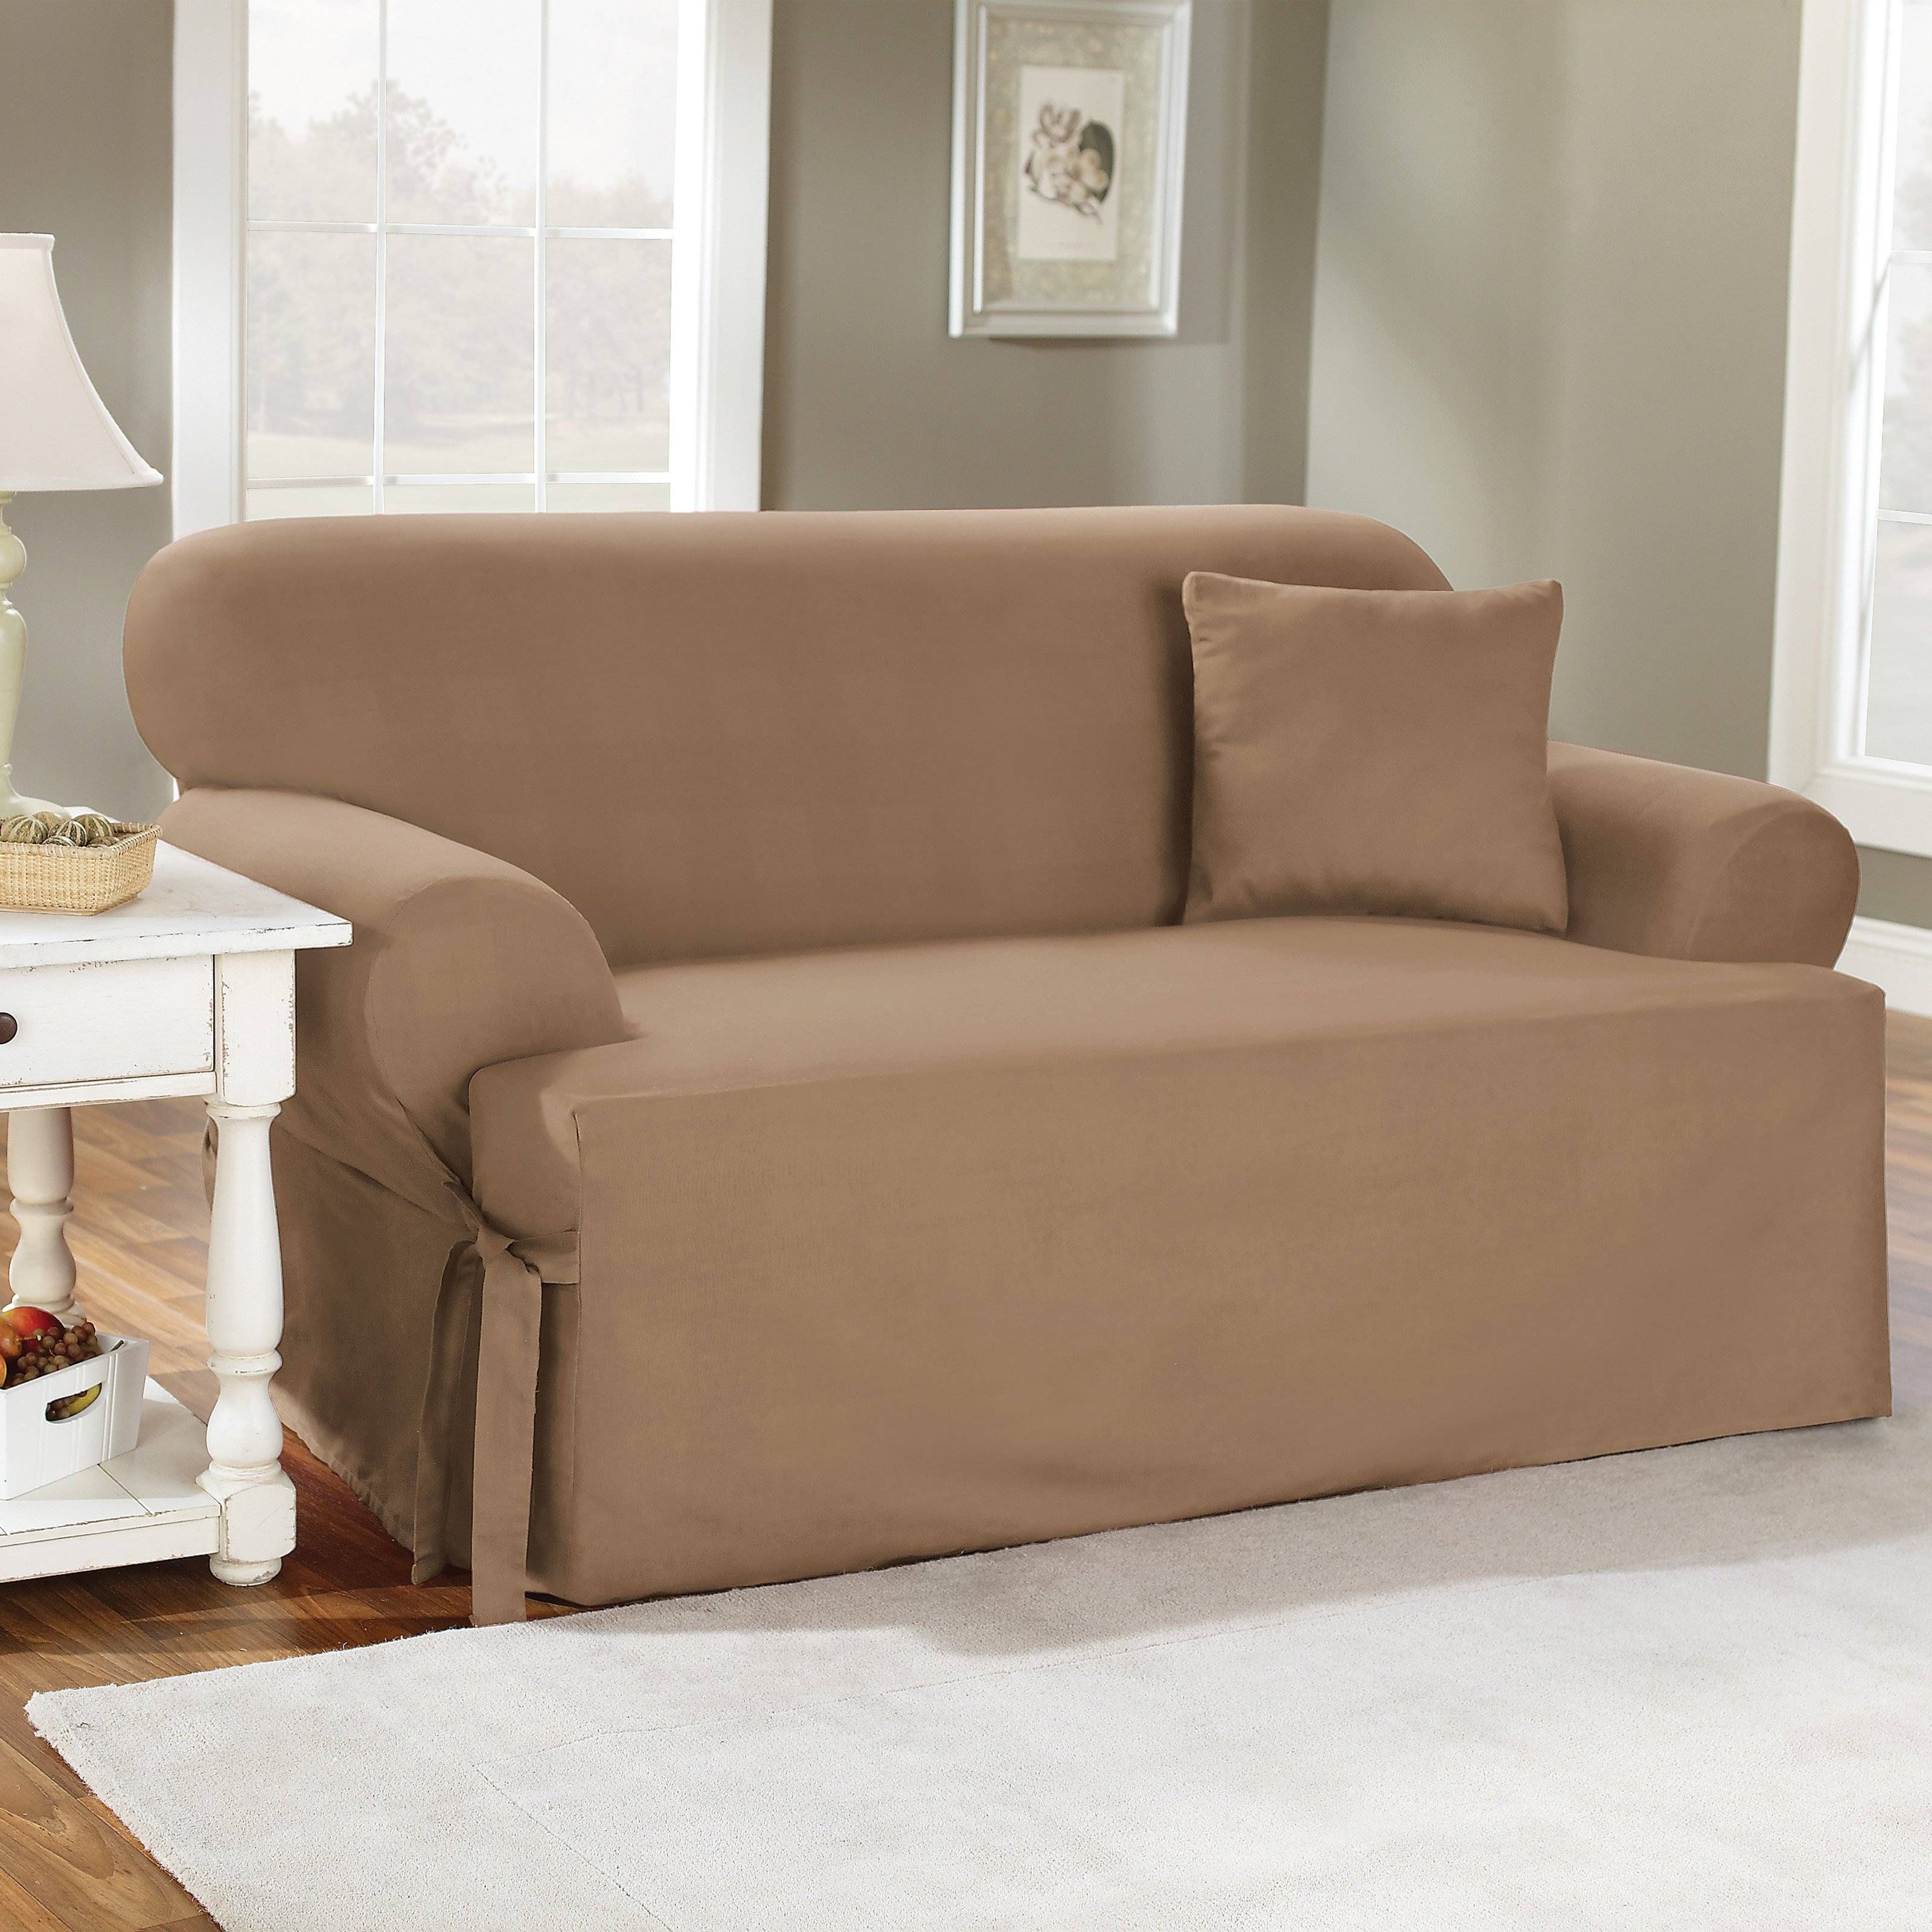 Furniture & Rug: Chic Recliner Covers For Prettier Recliner Ideas Pertaining To Black Slipcovers For Sofas (View 4 of 30)